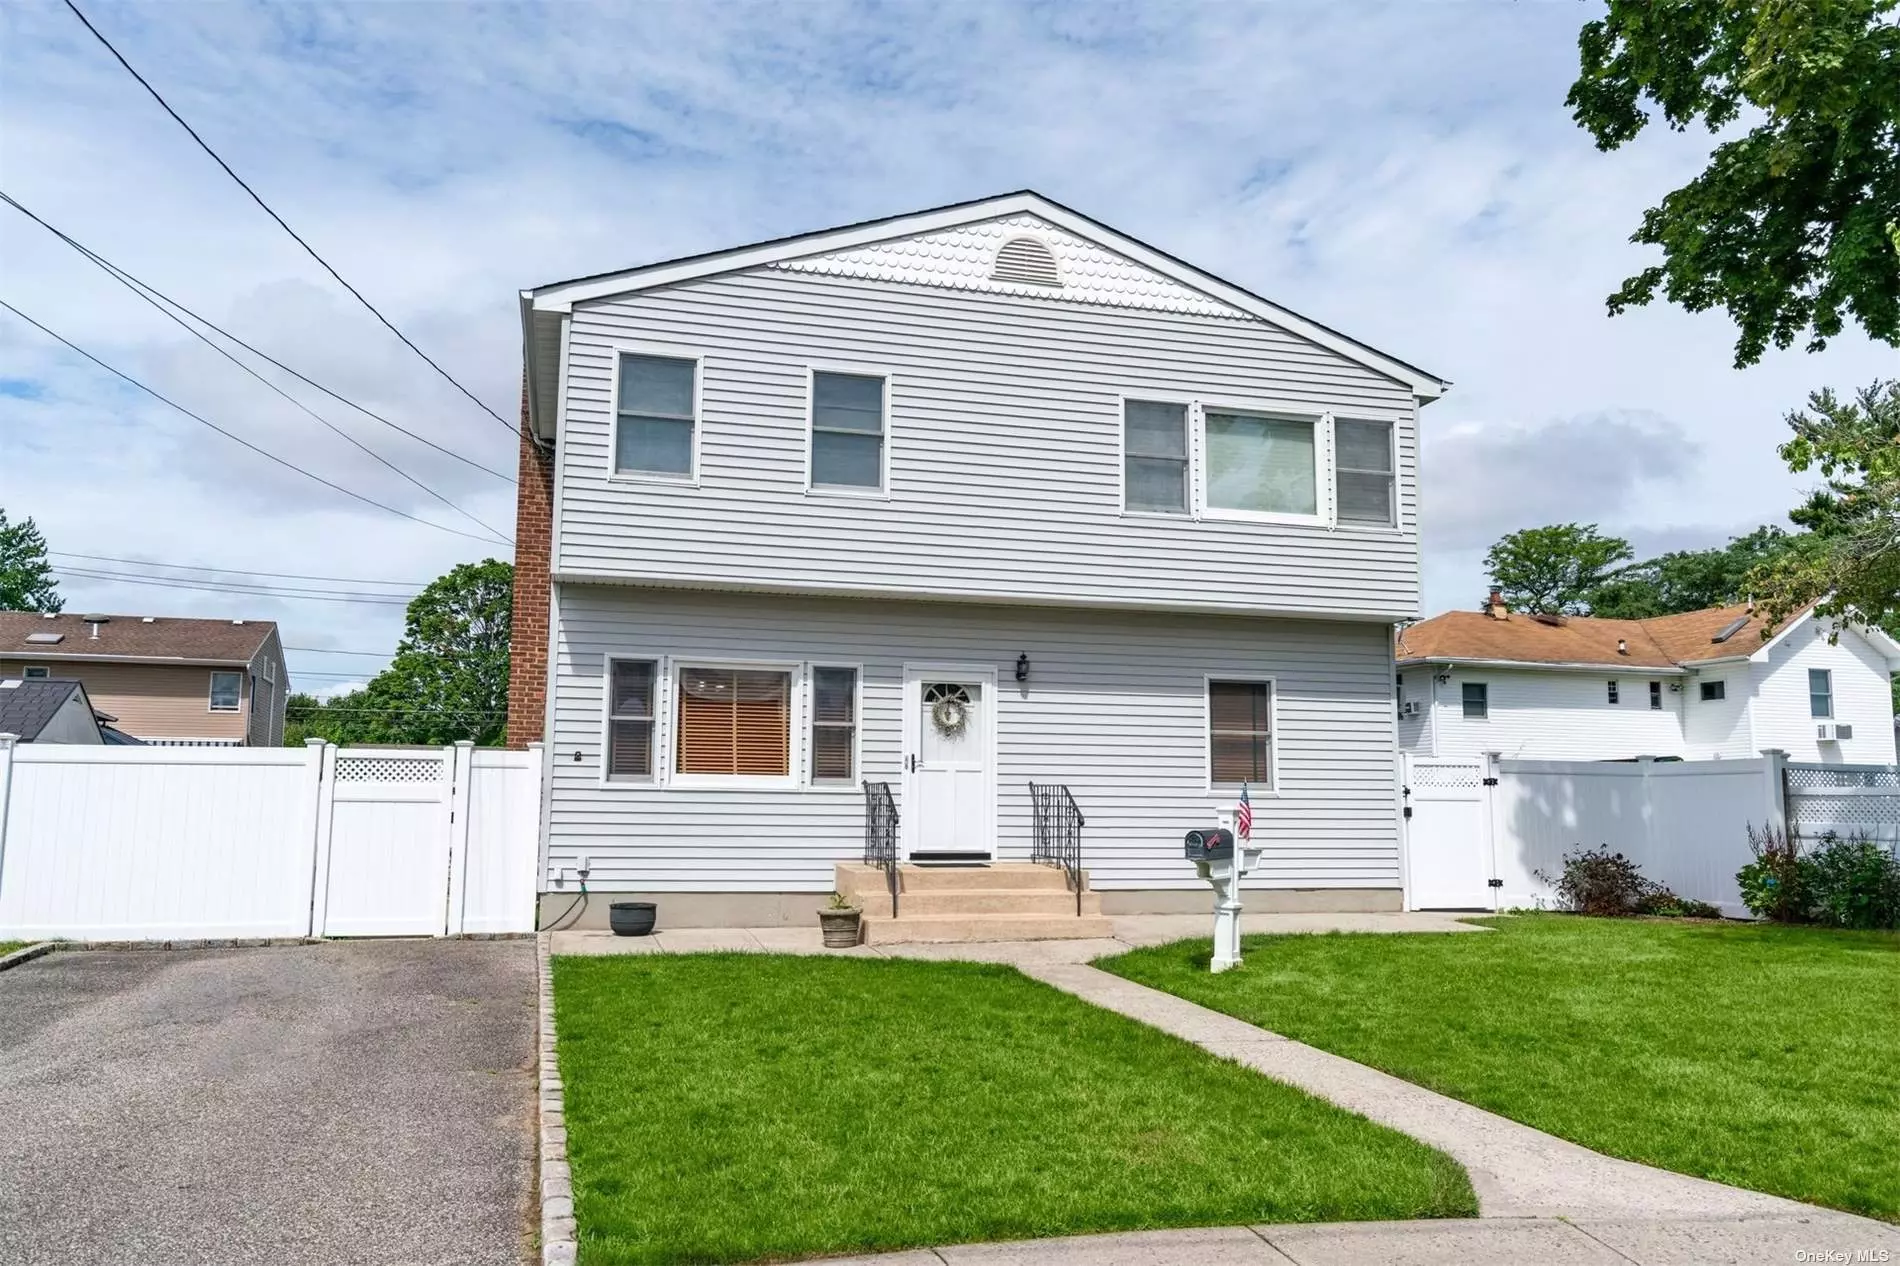 5 Bedroom Expanded Cape On Private Cul D Sac. Large Eat IN Kitchen, Fenced Yard, Basement With OSE.